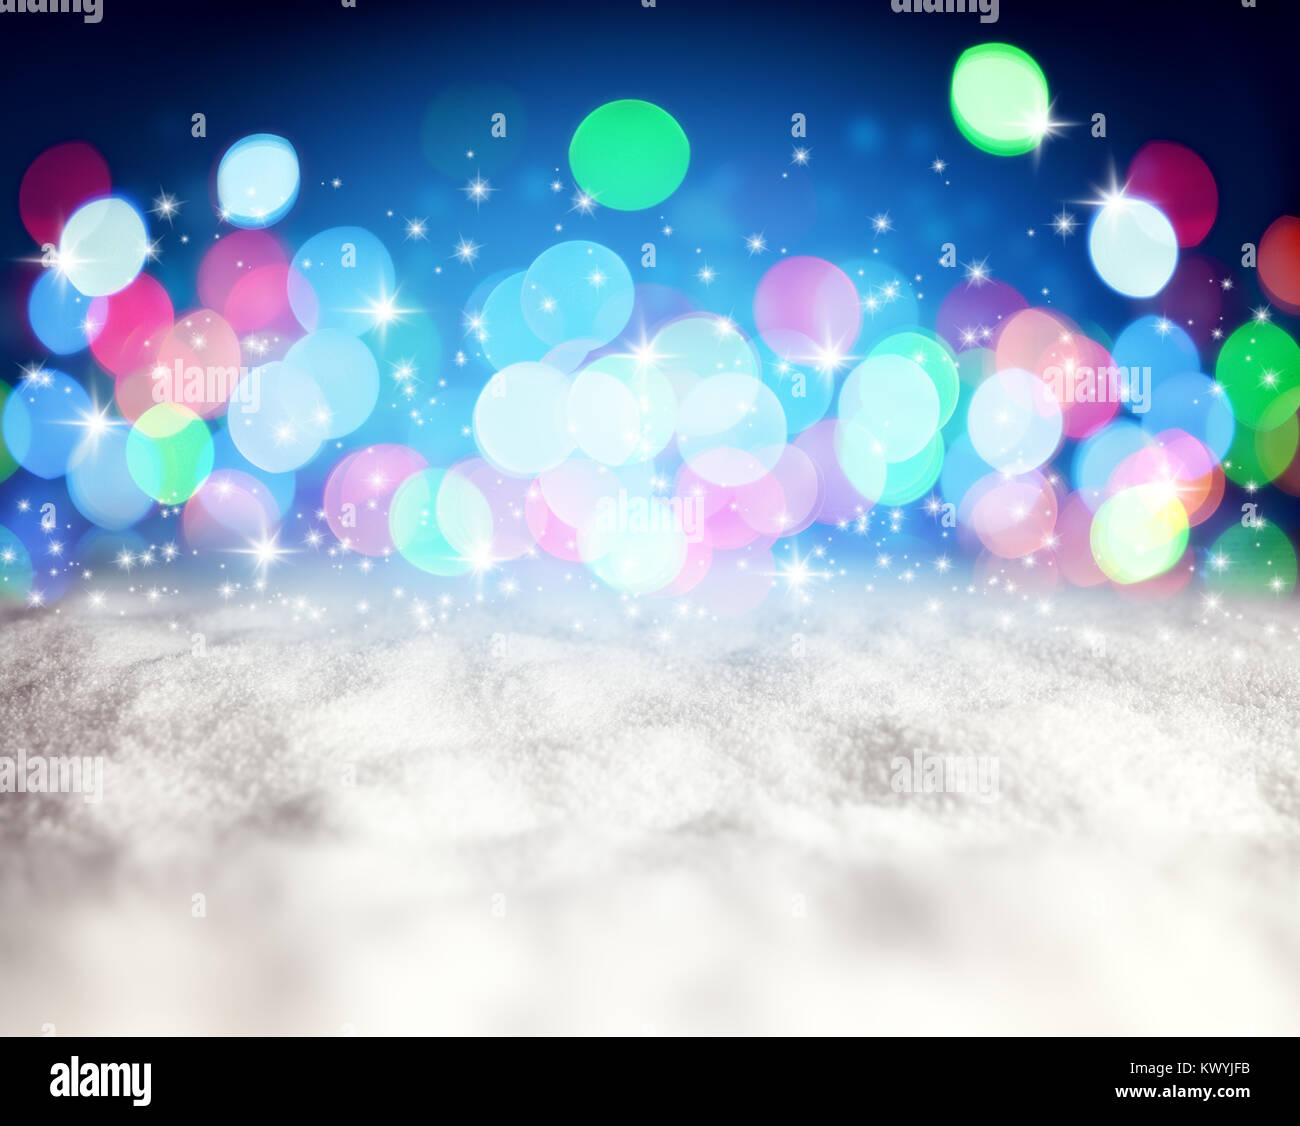 Christmas abstract blue background with snow and lights Stock Photo